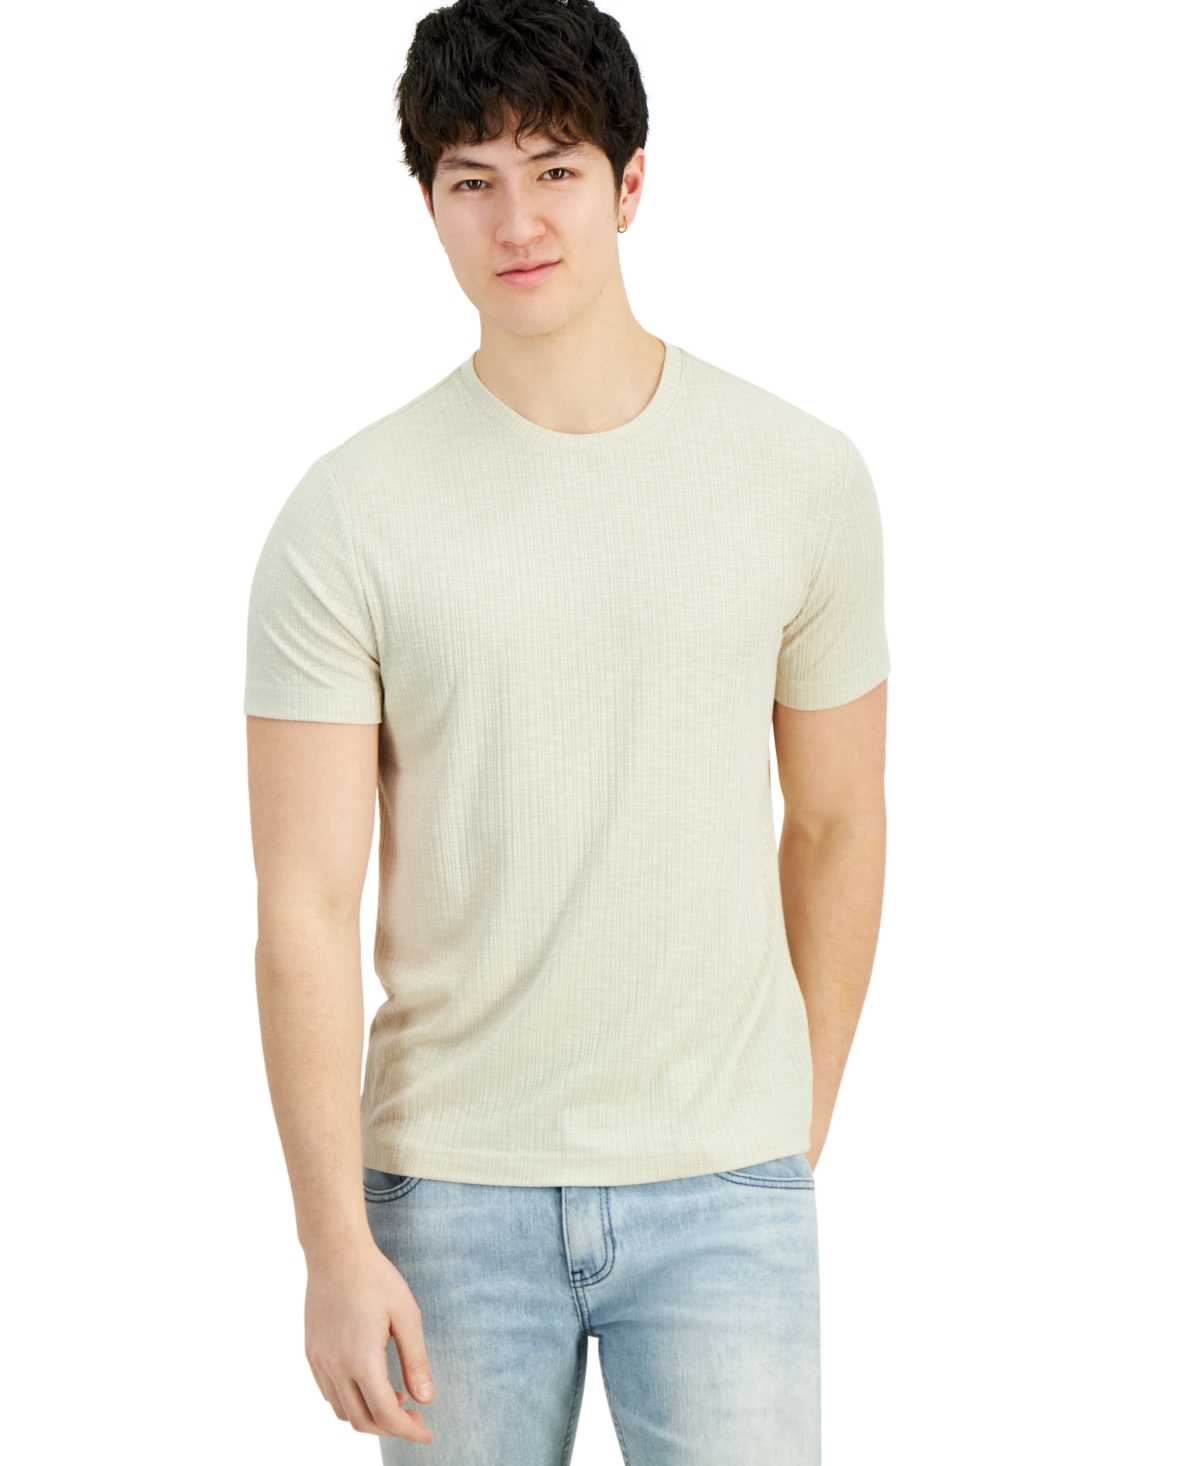 Men's Ribbed T-Shirt, Created for Macy's - Bright Sun